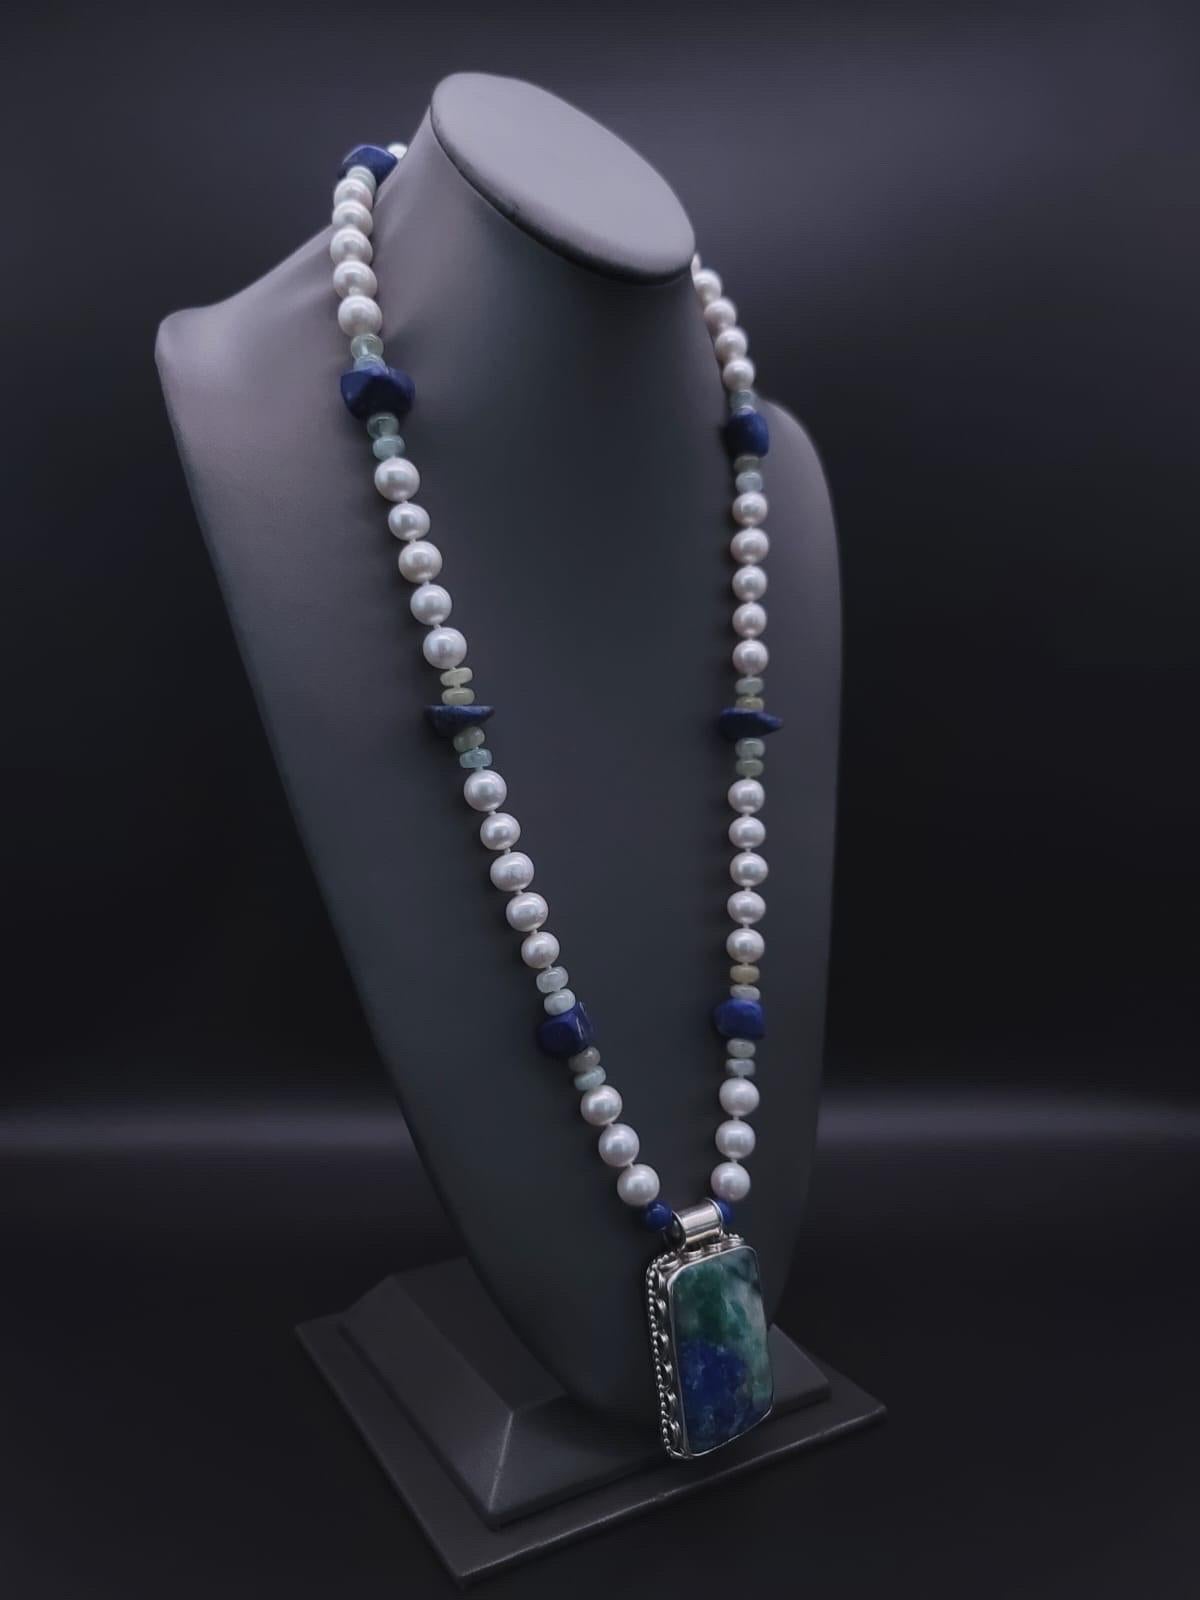 One-of-a-Kind

Long (36”) necklace anchored with a hard-to-find true blue and green Chrysocolla pendant set in sterling . The necklace is 10m.m freshwater pearls between natural polished lapis lazuli and aquamarine marine spacers mimicking the